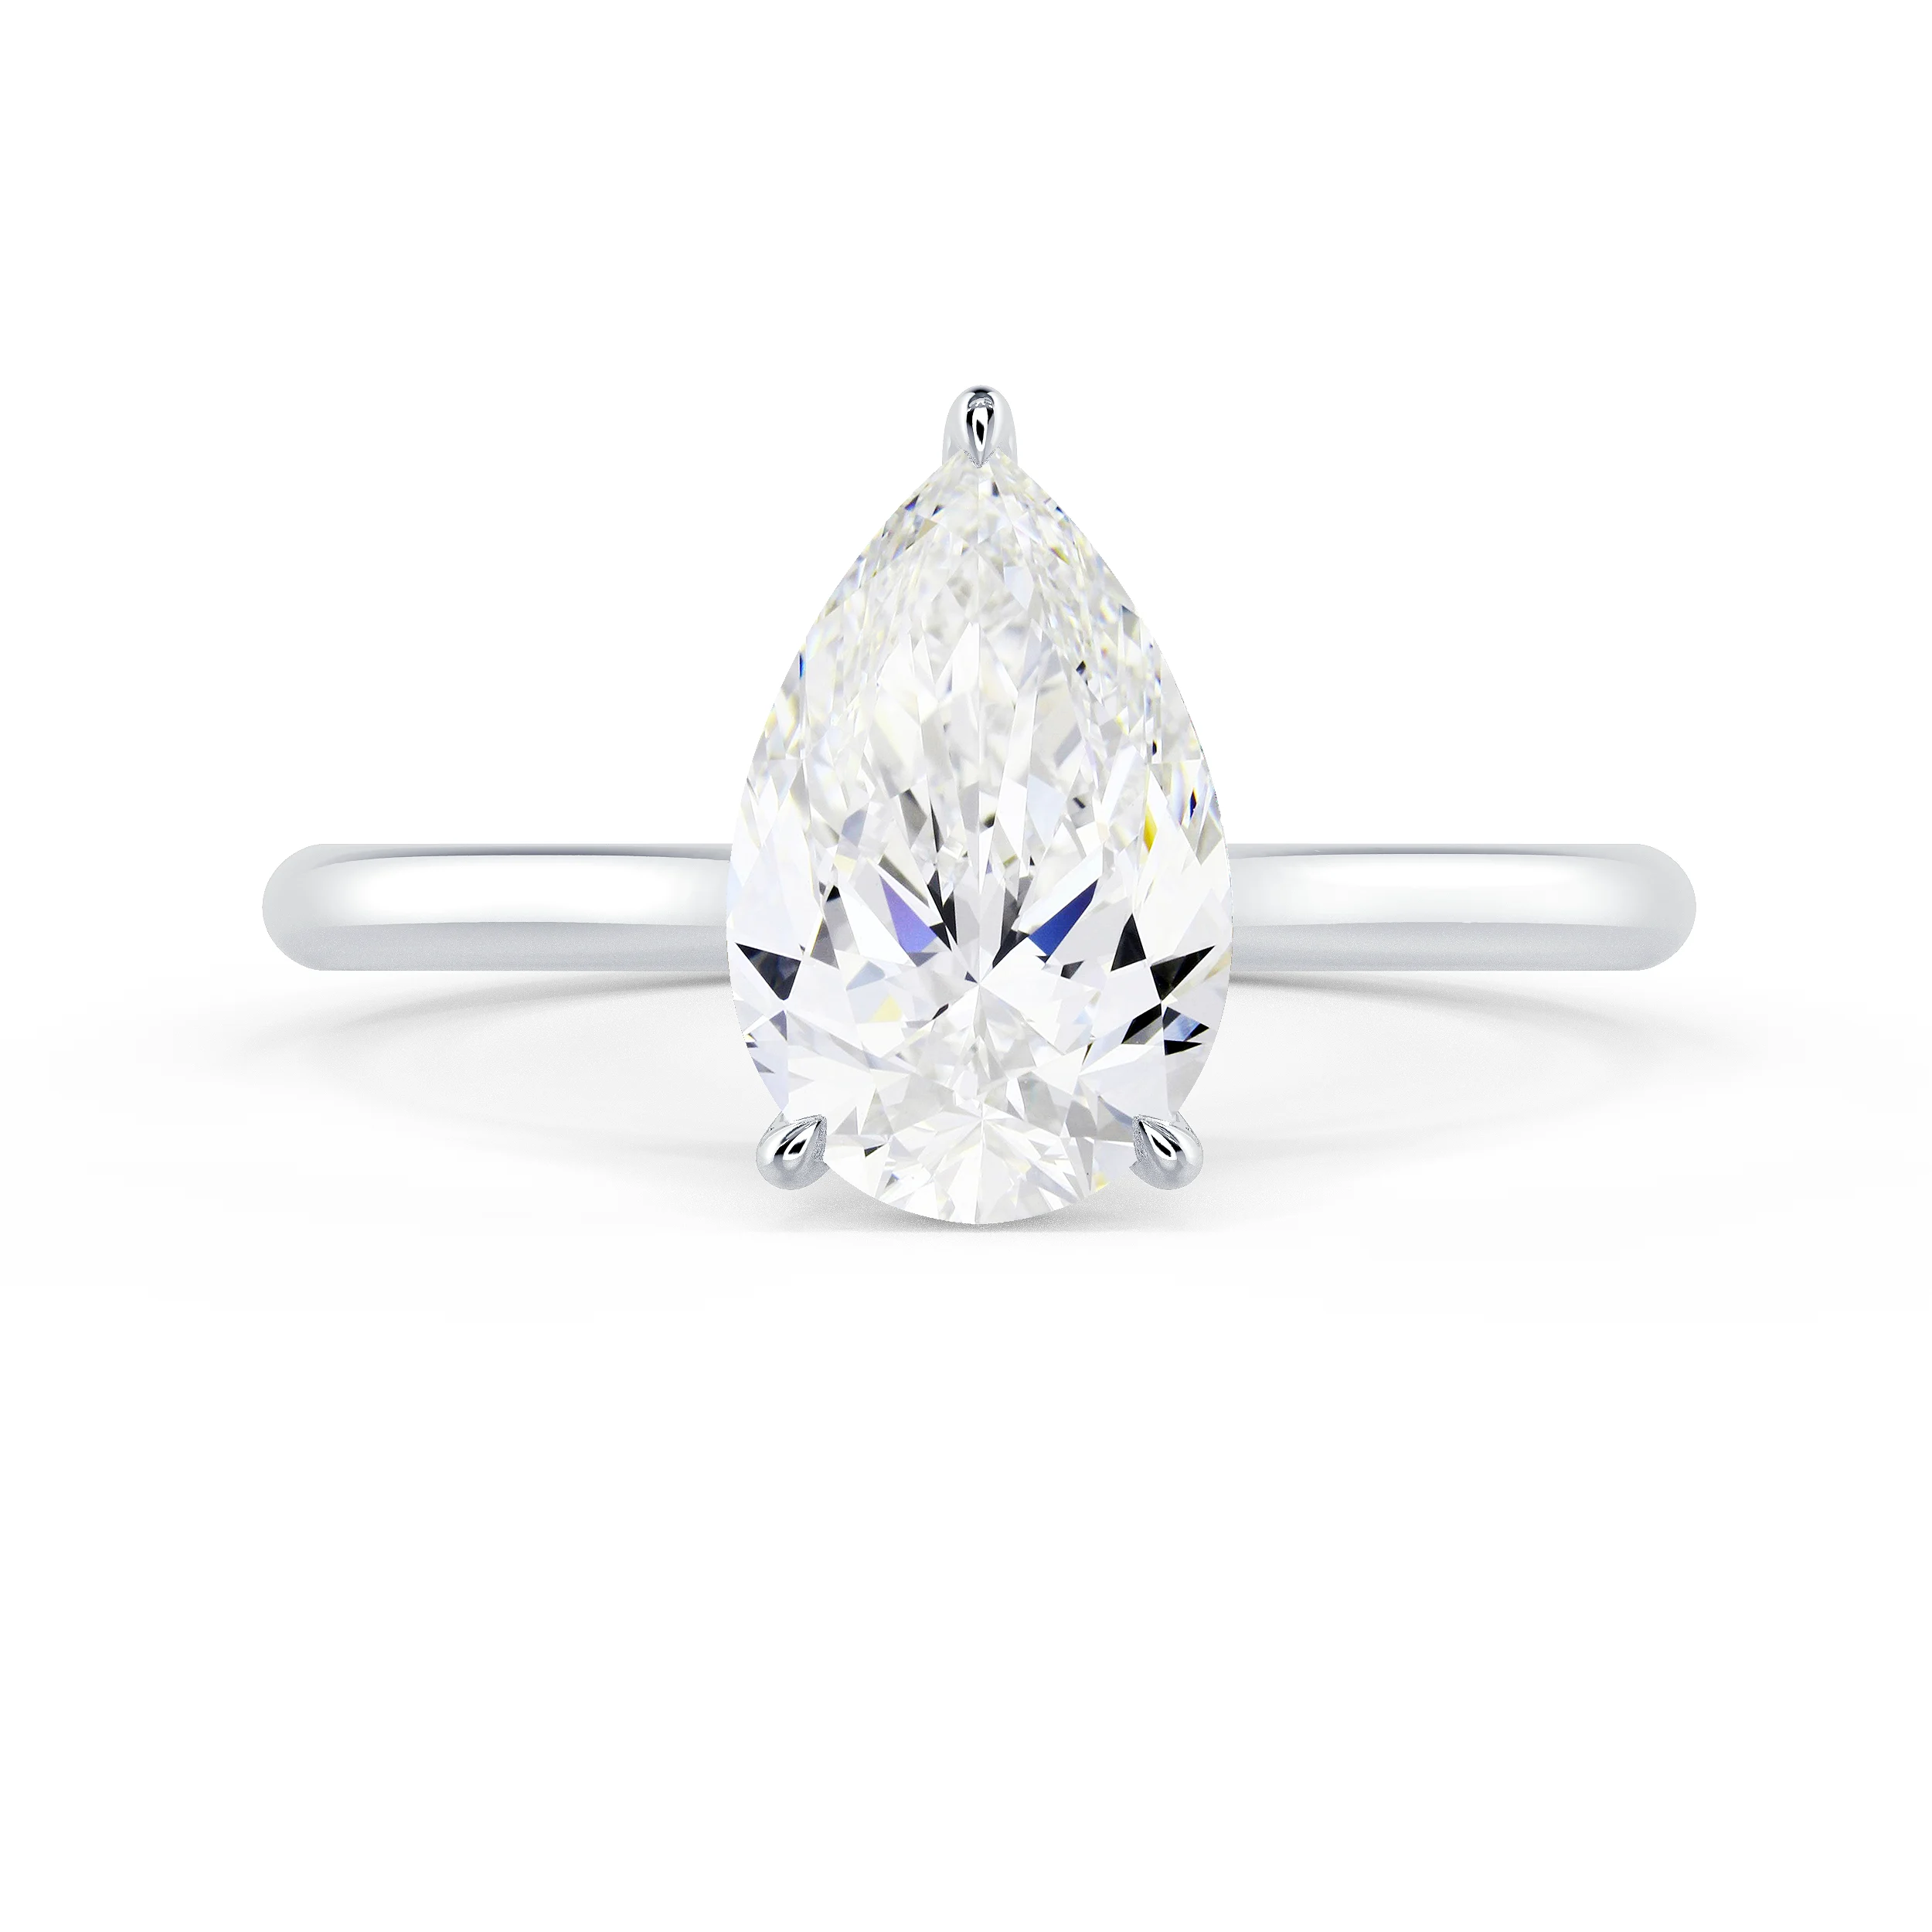 Exceptional Quality Synthetic Diamonds Pear Cathedral Solitaire Diamond Engagement Ring in White Gold (Main View)